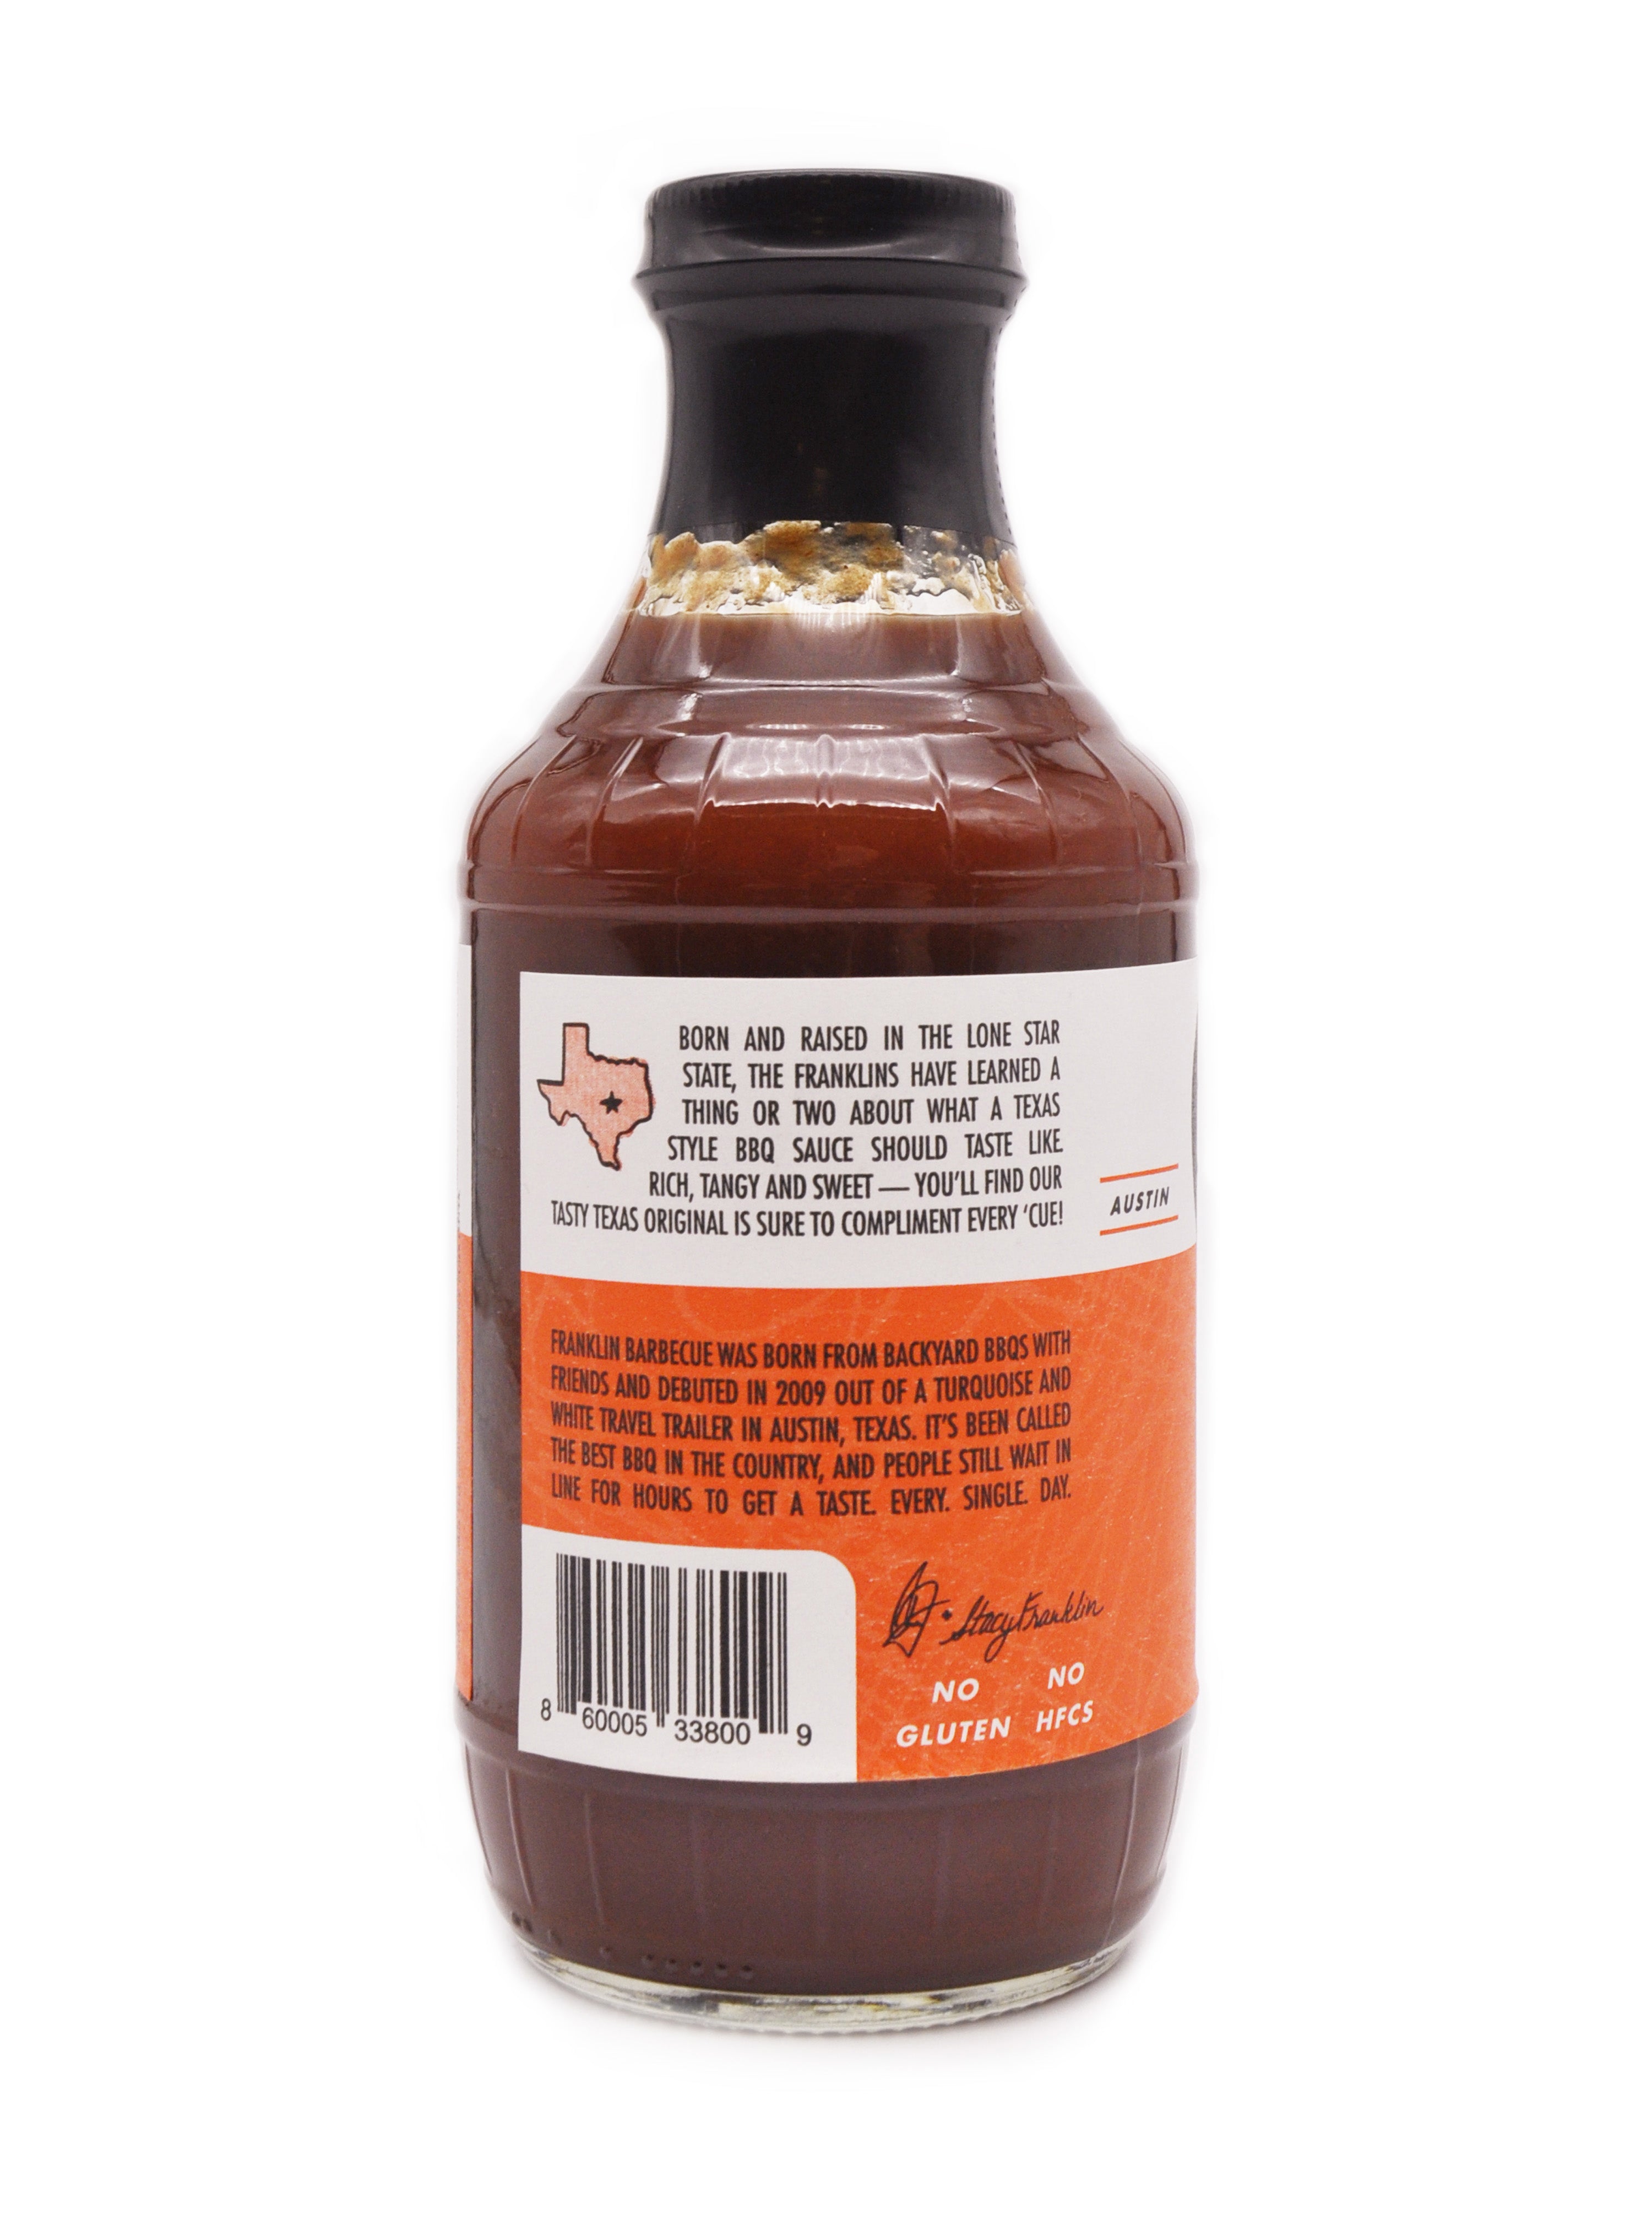 Back label of Franklin Barbecue Original sauce showing tasting notes and background story of the restaurant.